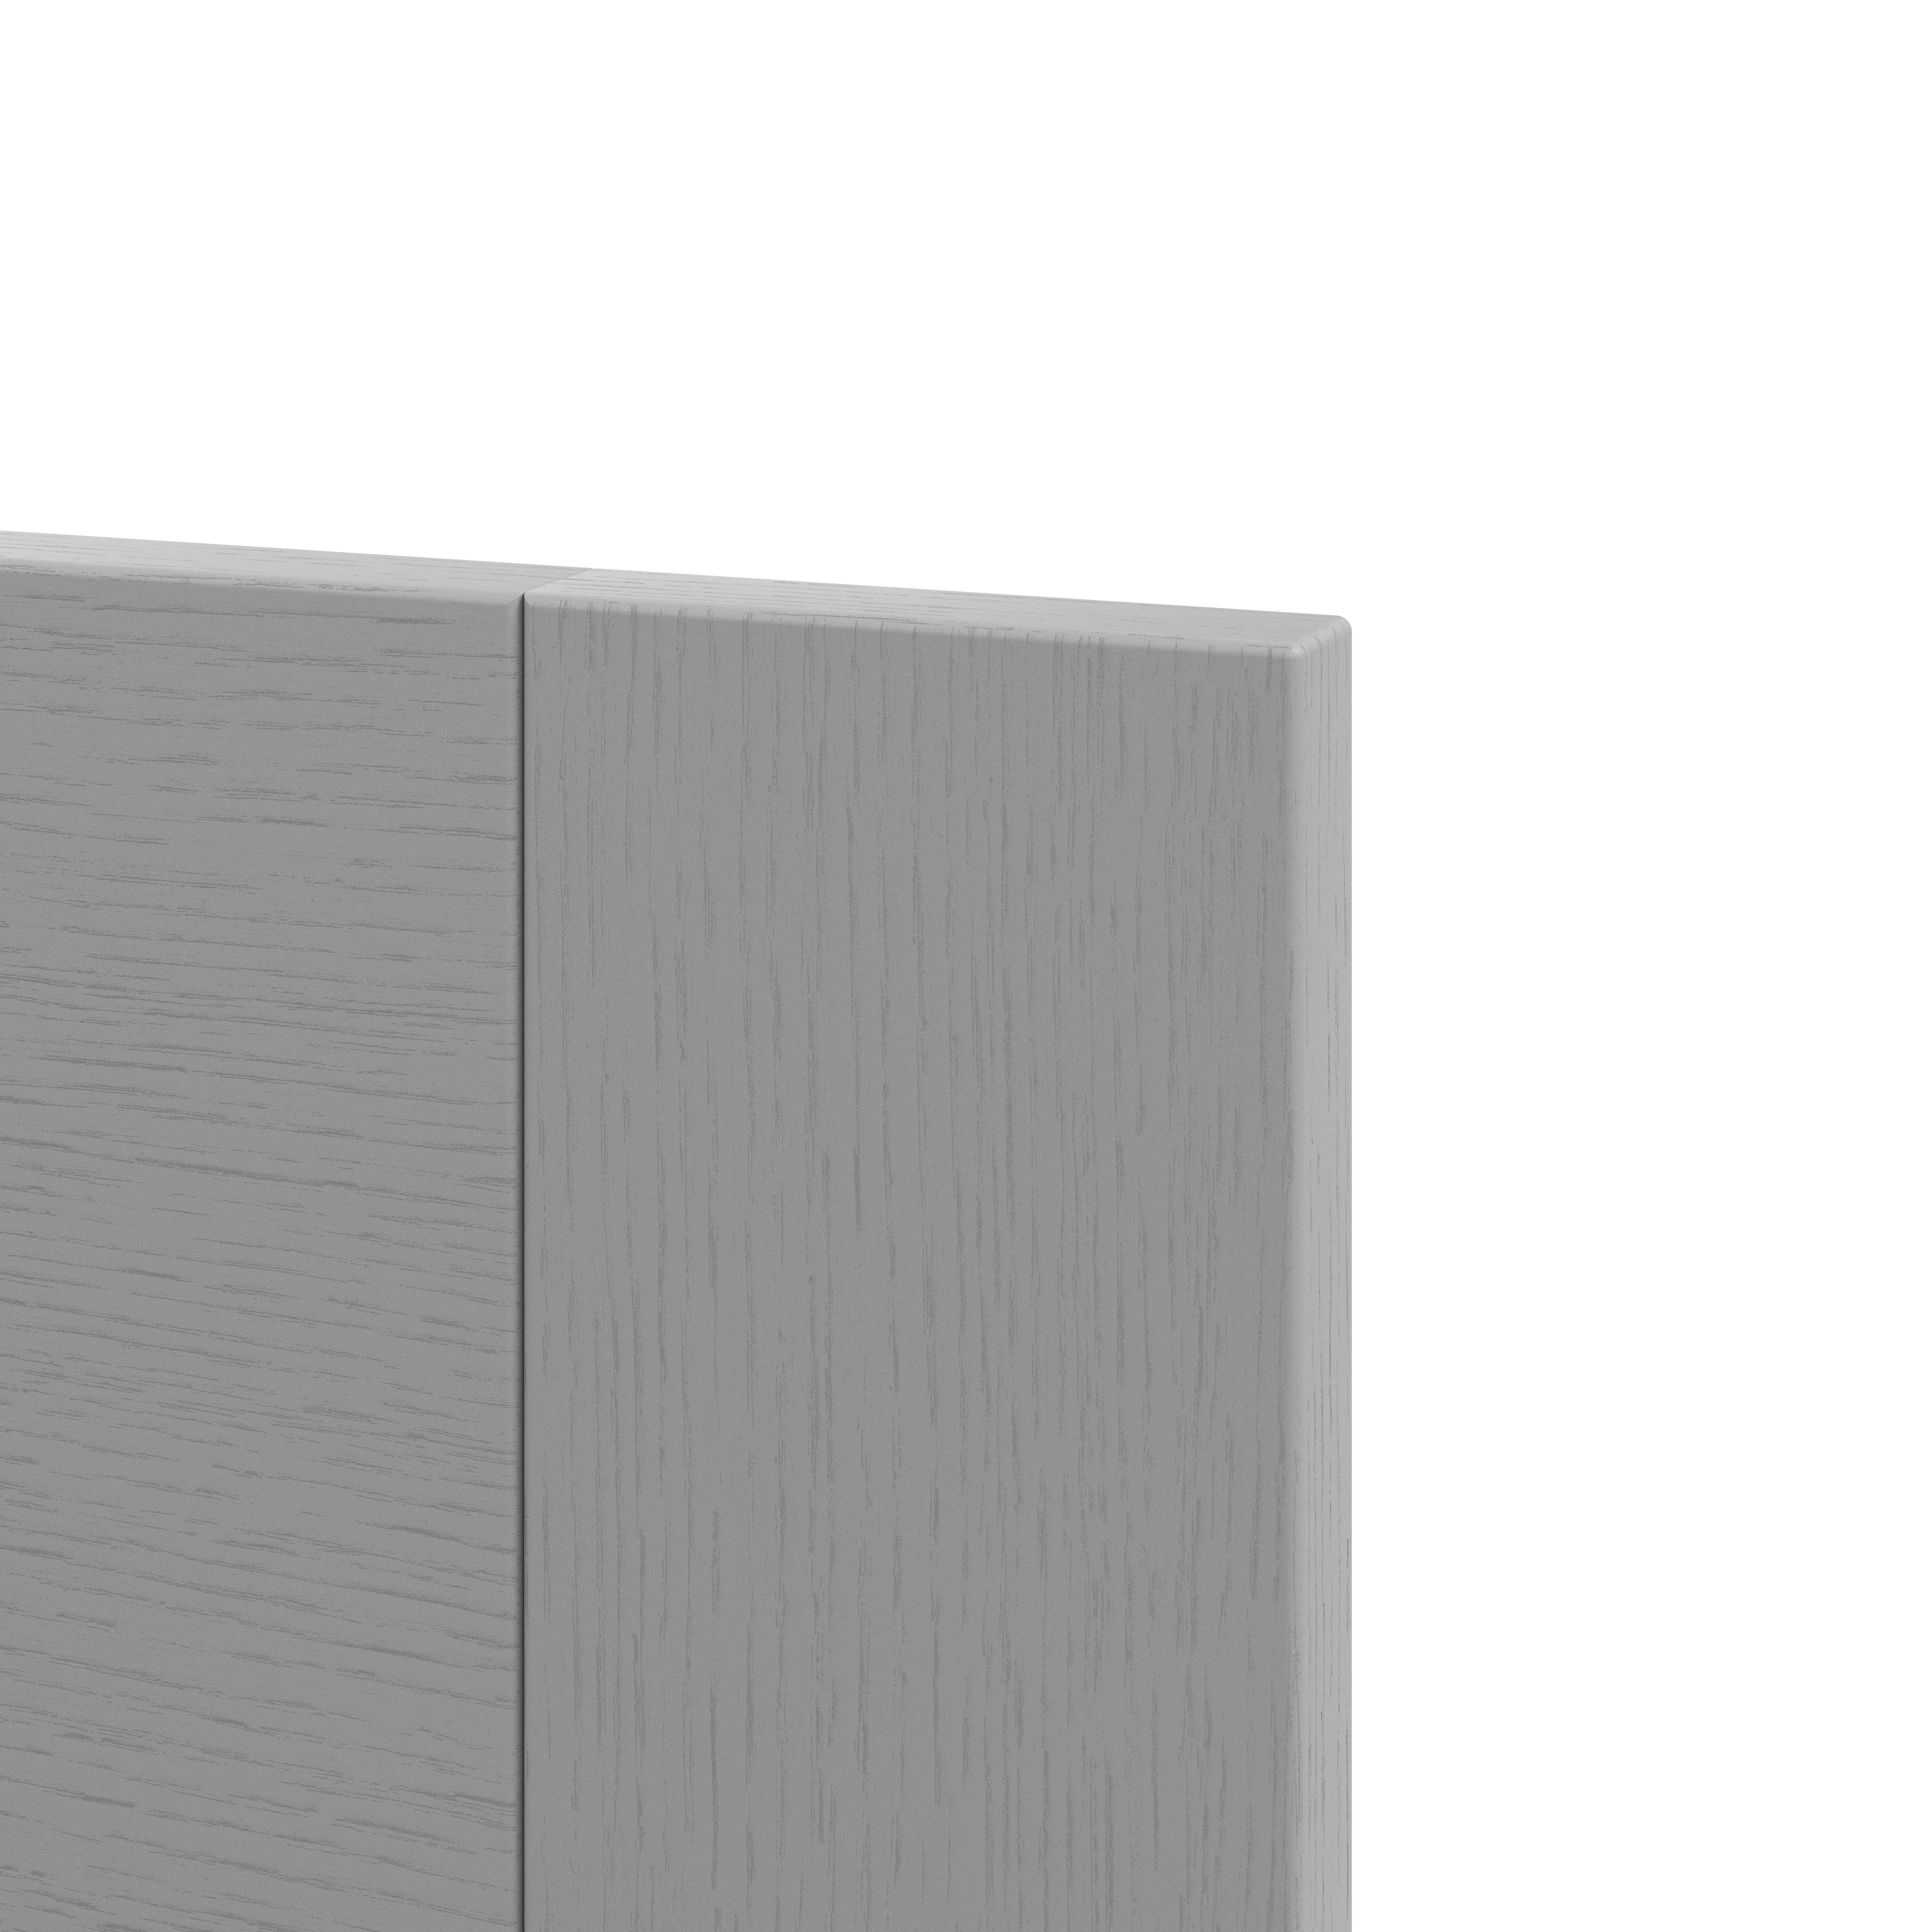 GoodHome Alpinia Matt Slate Grey Painted Wood Effect Shaker Drawer front (W)800mm, Pack of 3